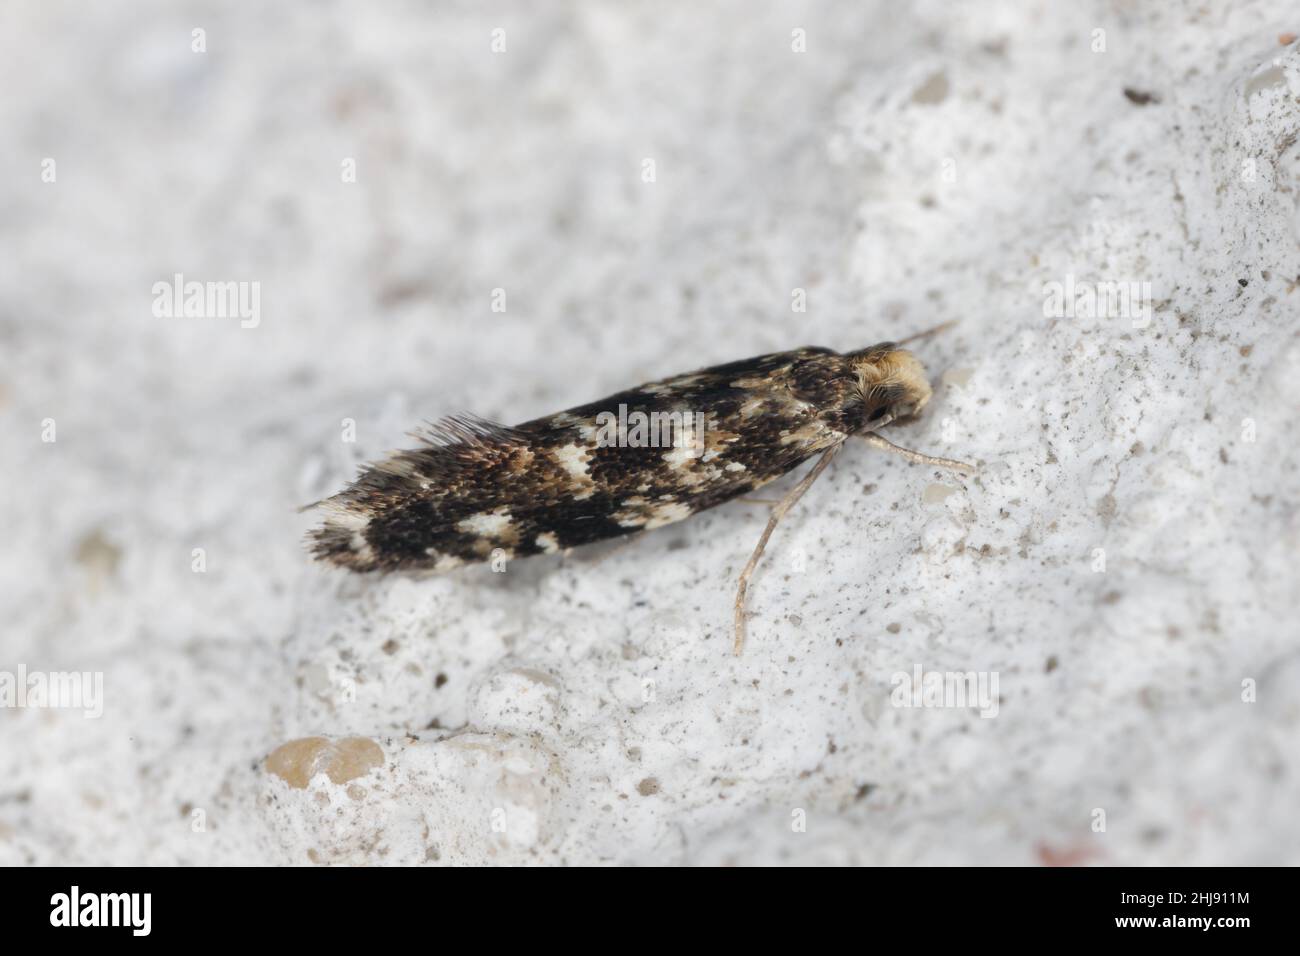 Cork Moth - Nemapogon cloacella is a species of tineoid moth. It belongs to the fungus moth family (Tineidae), Common pests of stored products. Stock Photo